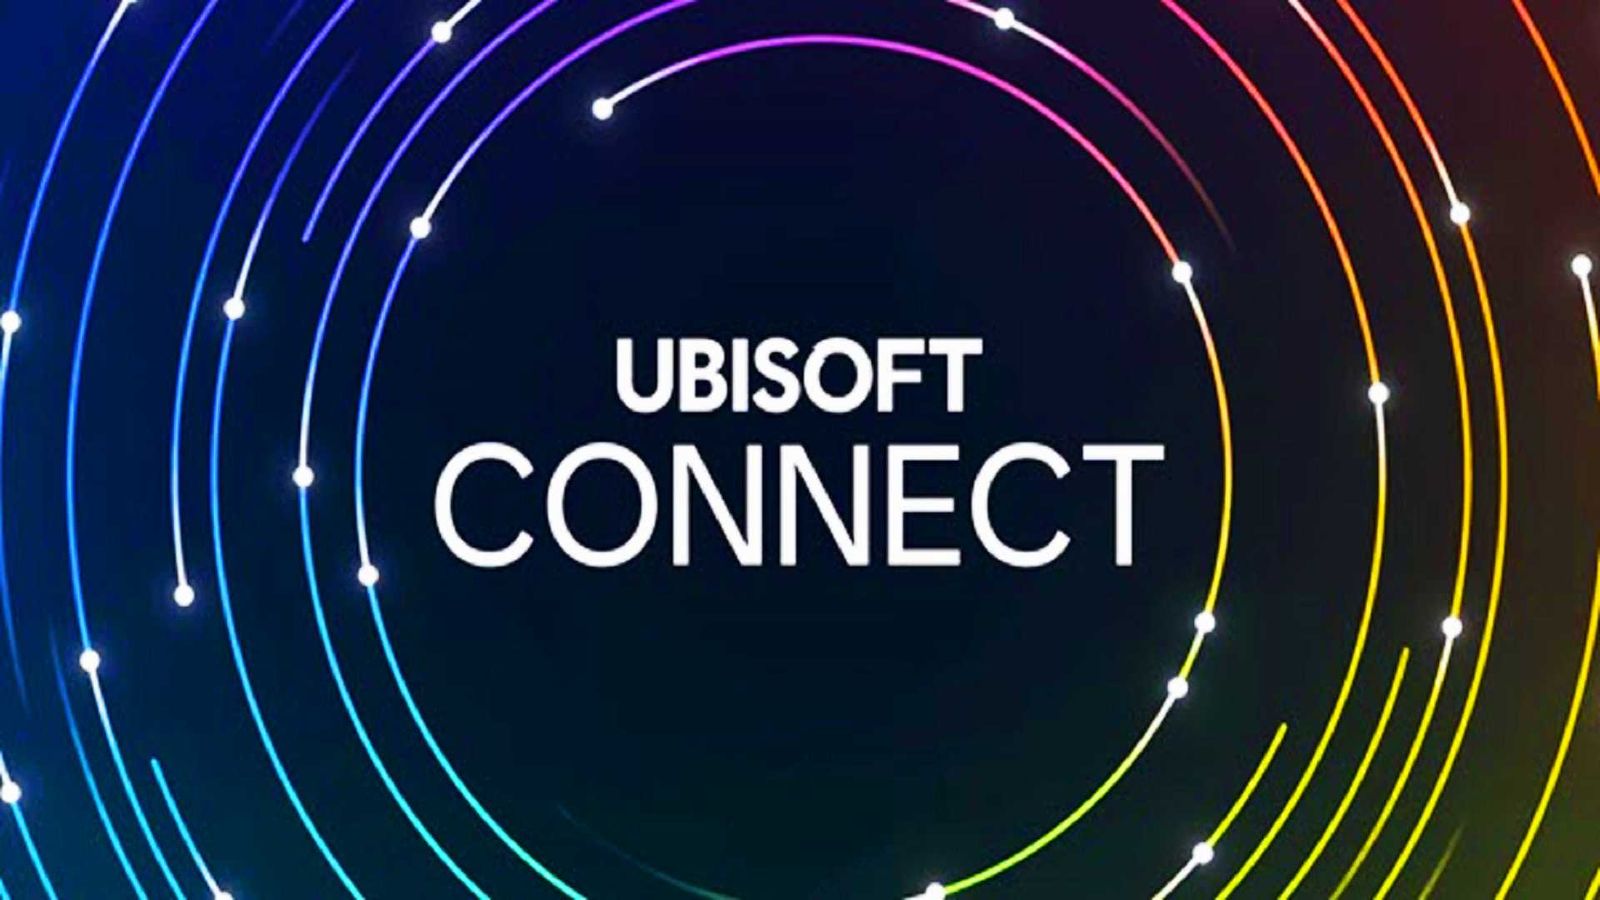 How to fix "Ubisoft Connect has detected an unrecoverable error"